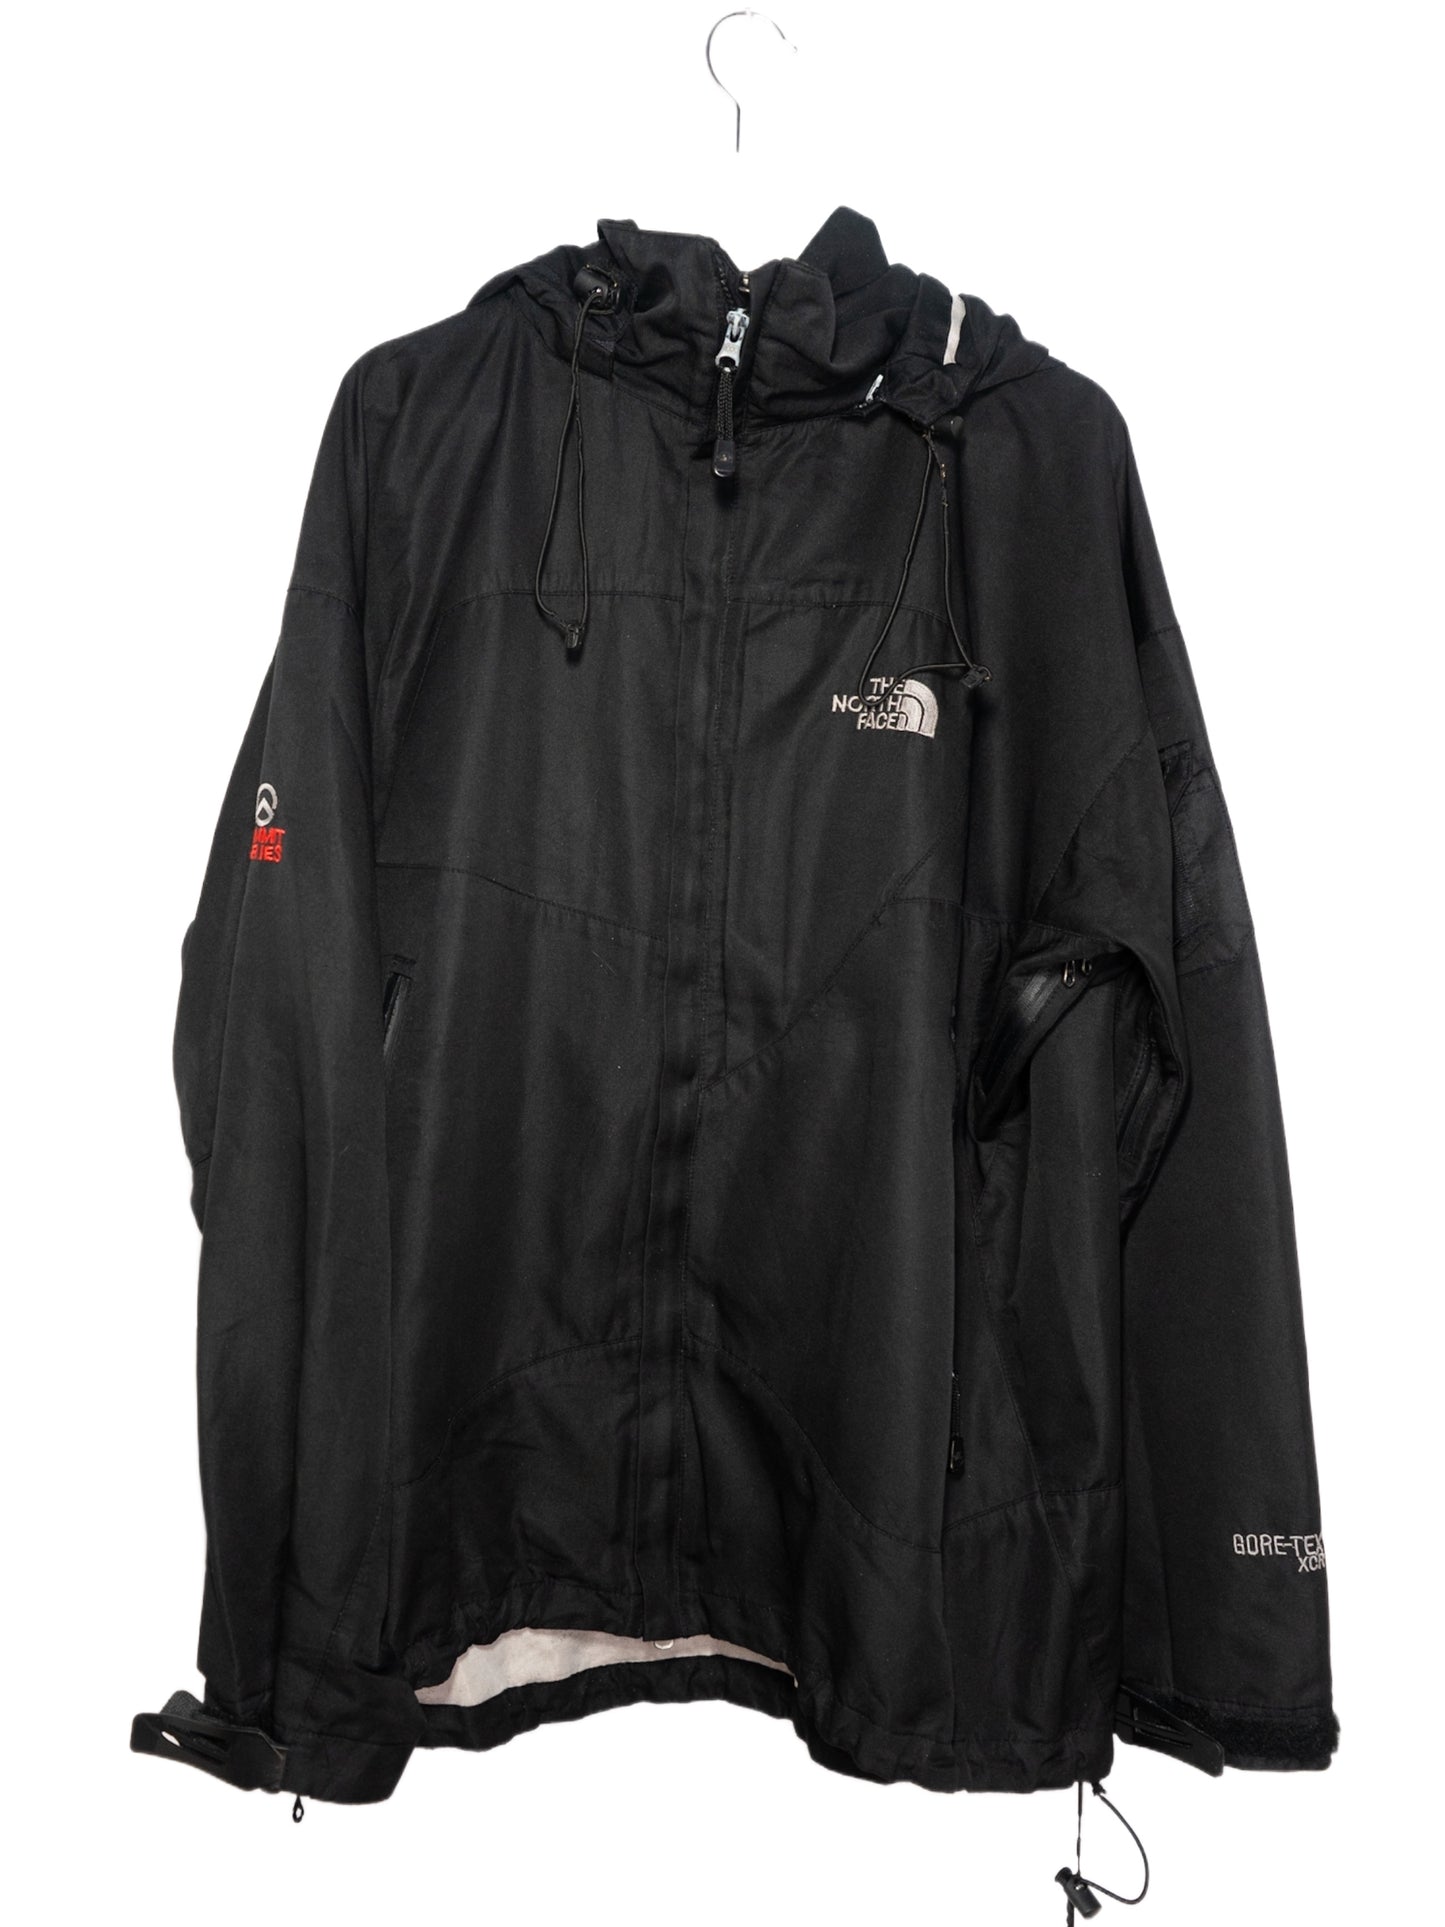 The North Face Summit Series Track Jacket